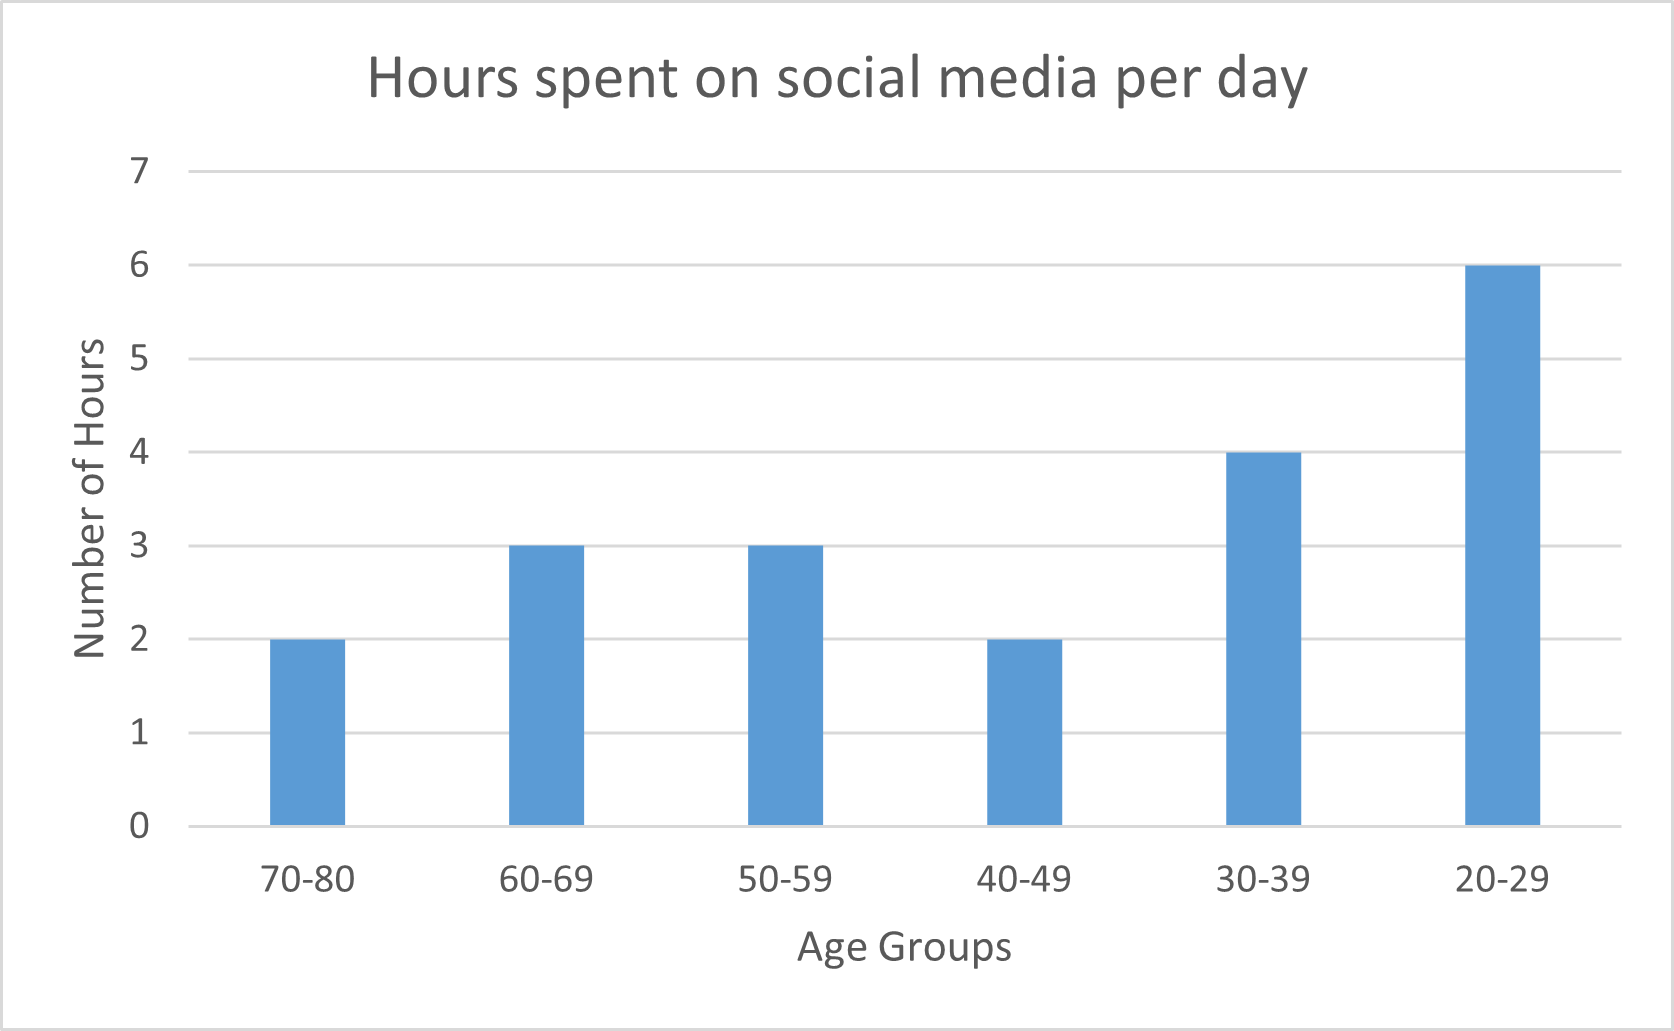 Bar chart showing hours spent on social media per day